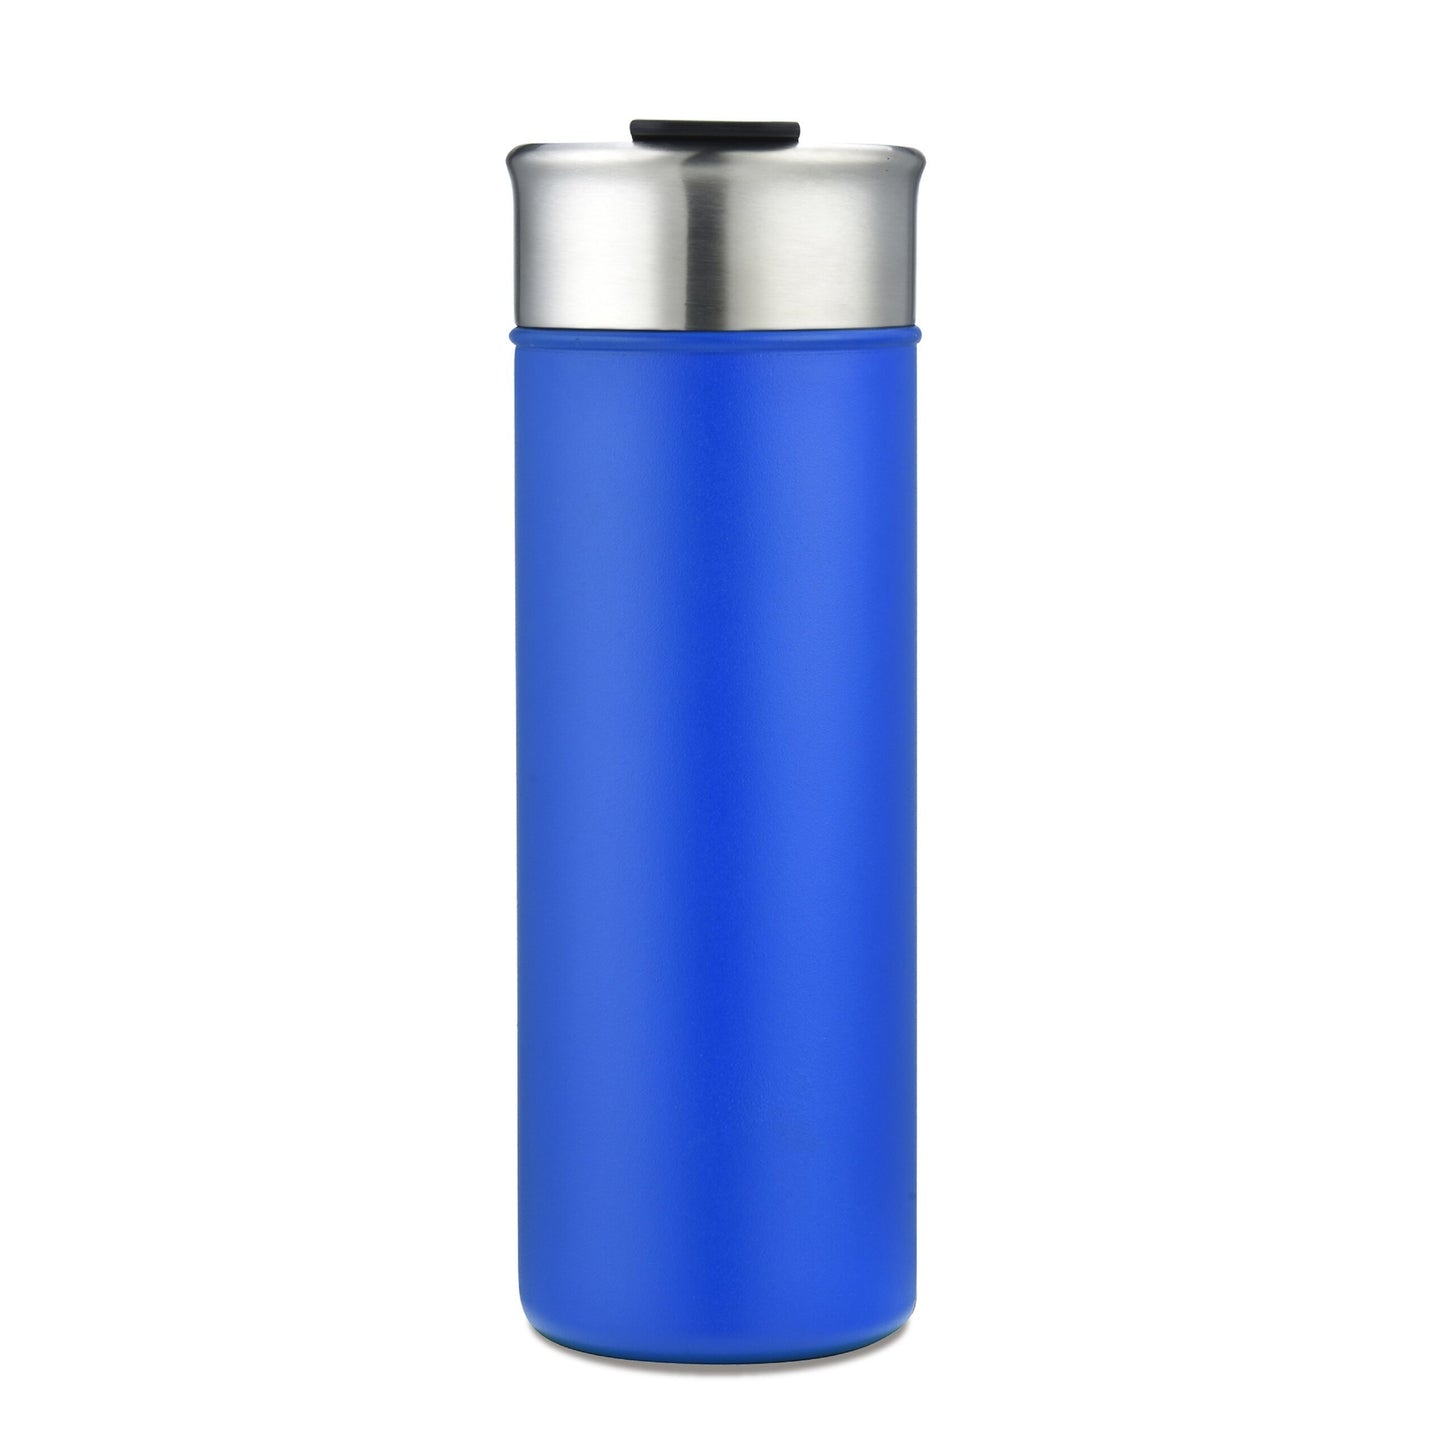 Boise 18 oz Double Wall Stainless Steel Vacuum Tumbler